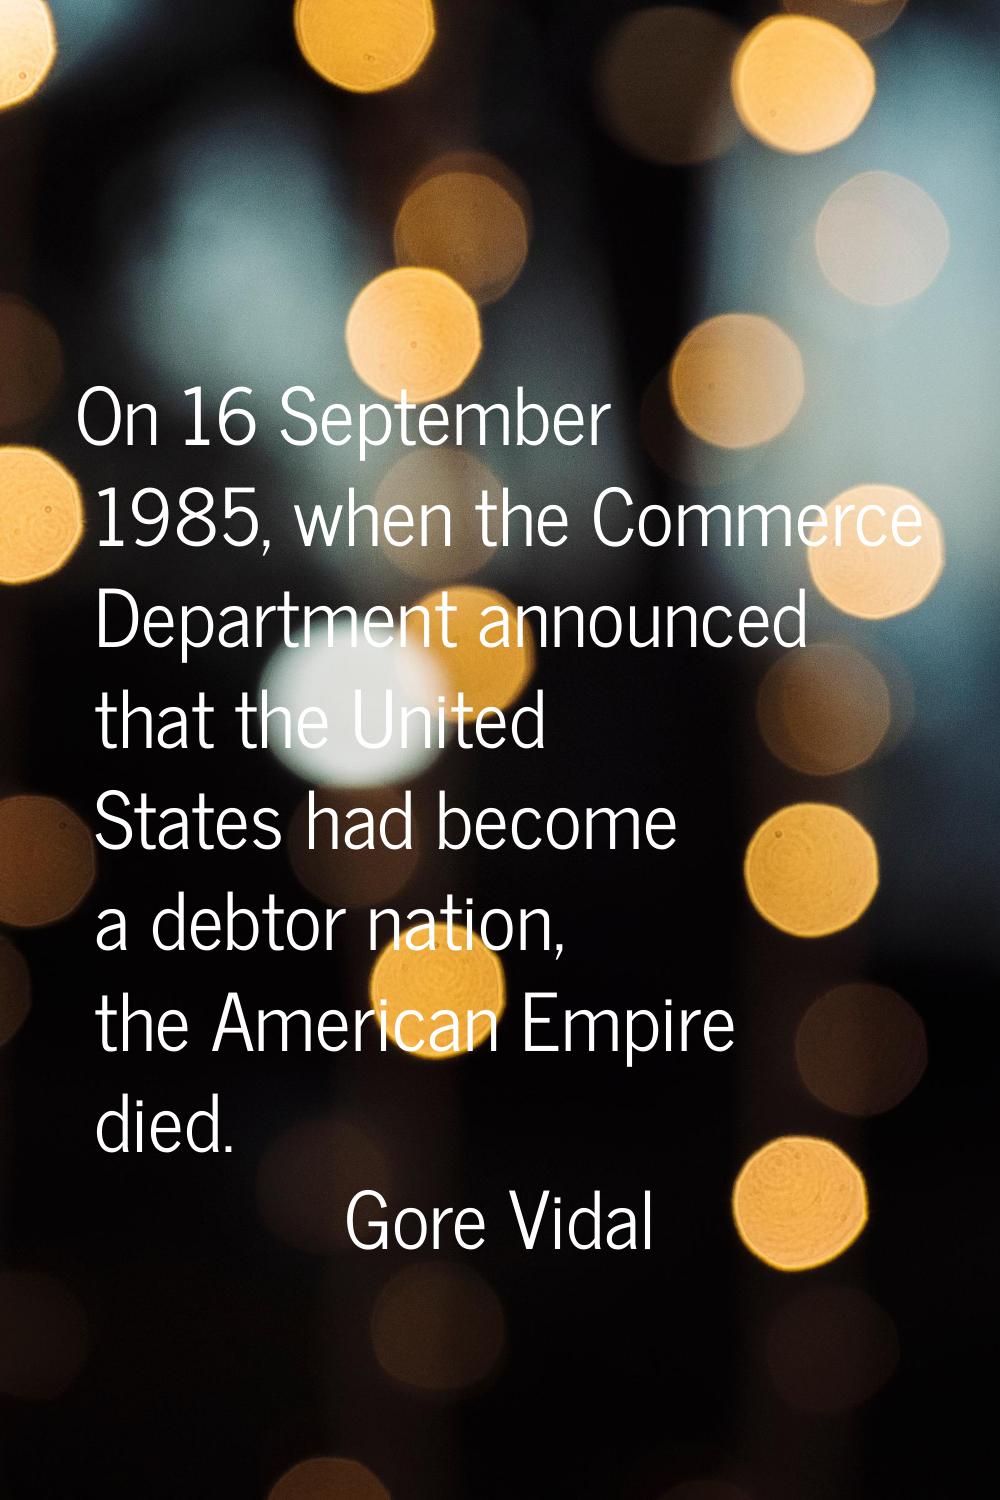 On 16 September 1985, when the Commerce Department announced that the United States had become a de